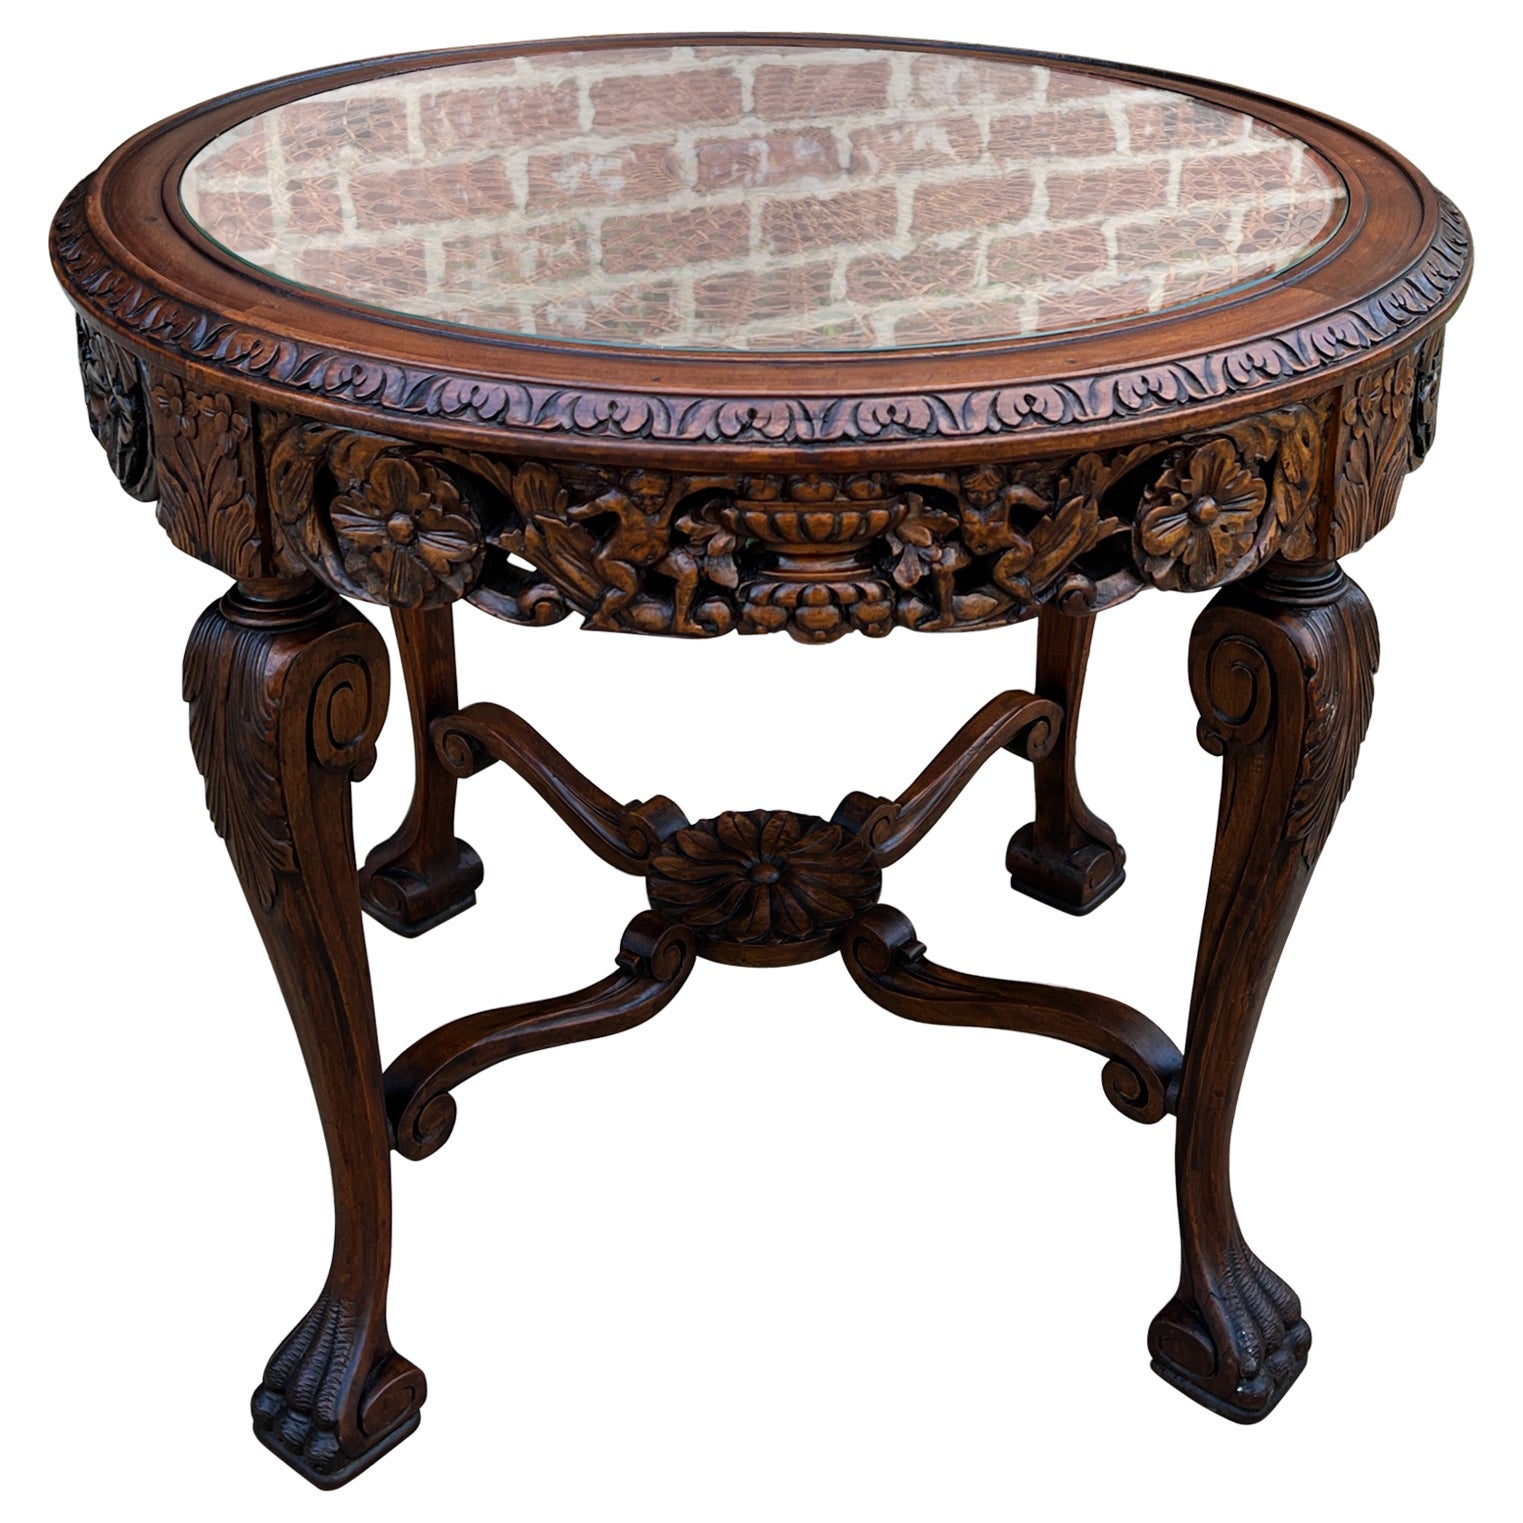 Antique French Round End Table Occasional Bed Table Caned Glass Top Walnut 19c For Sale